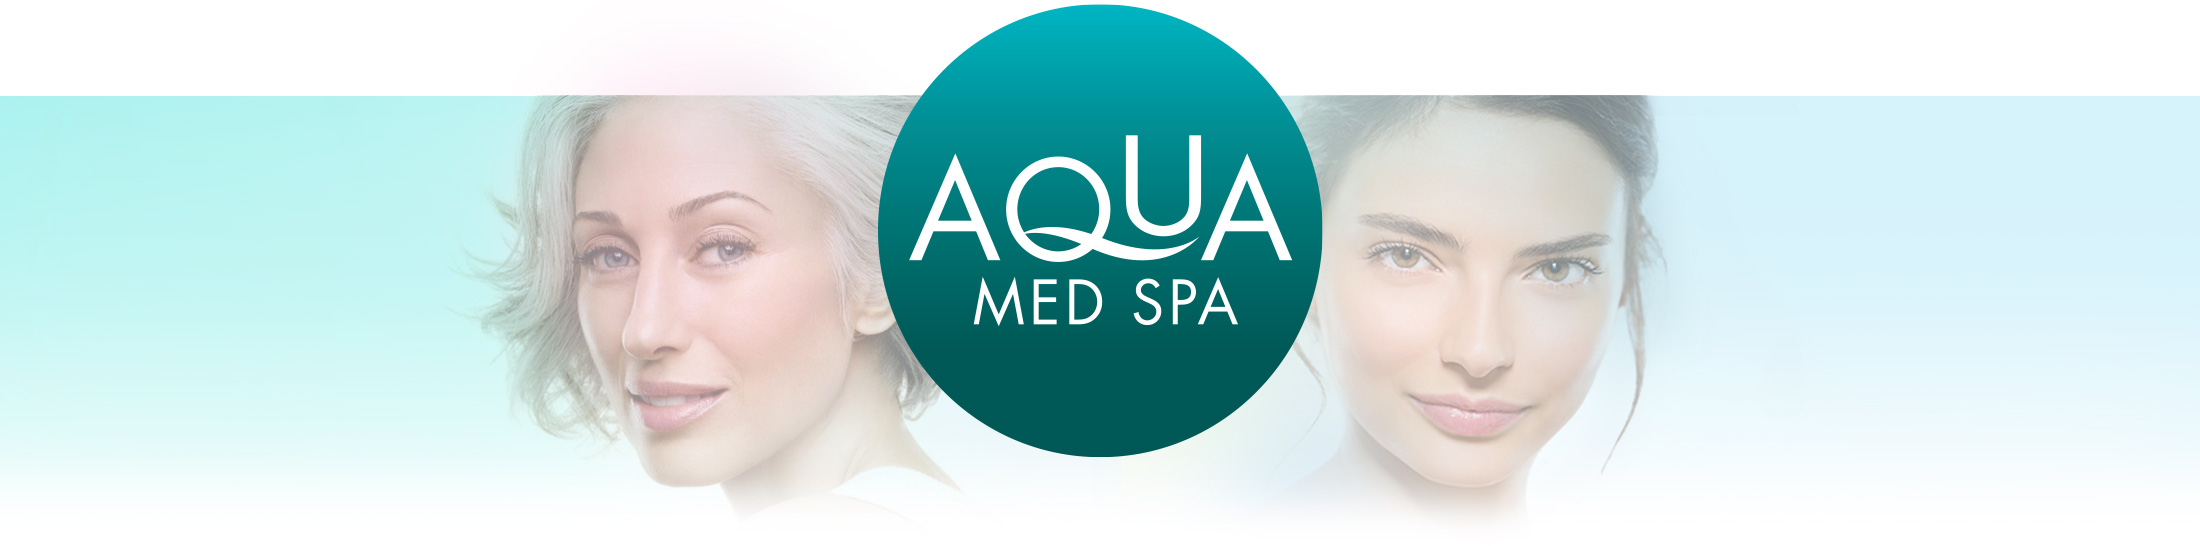 Aqua Med Spa in Ocala and the Villages, FL